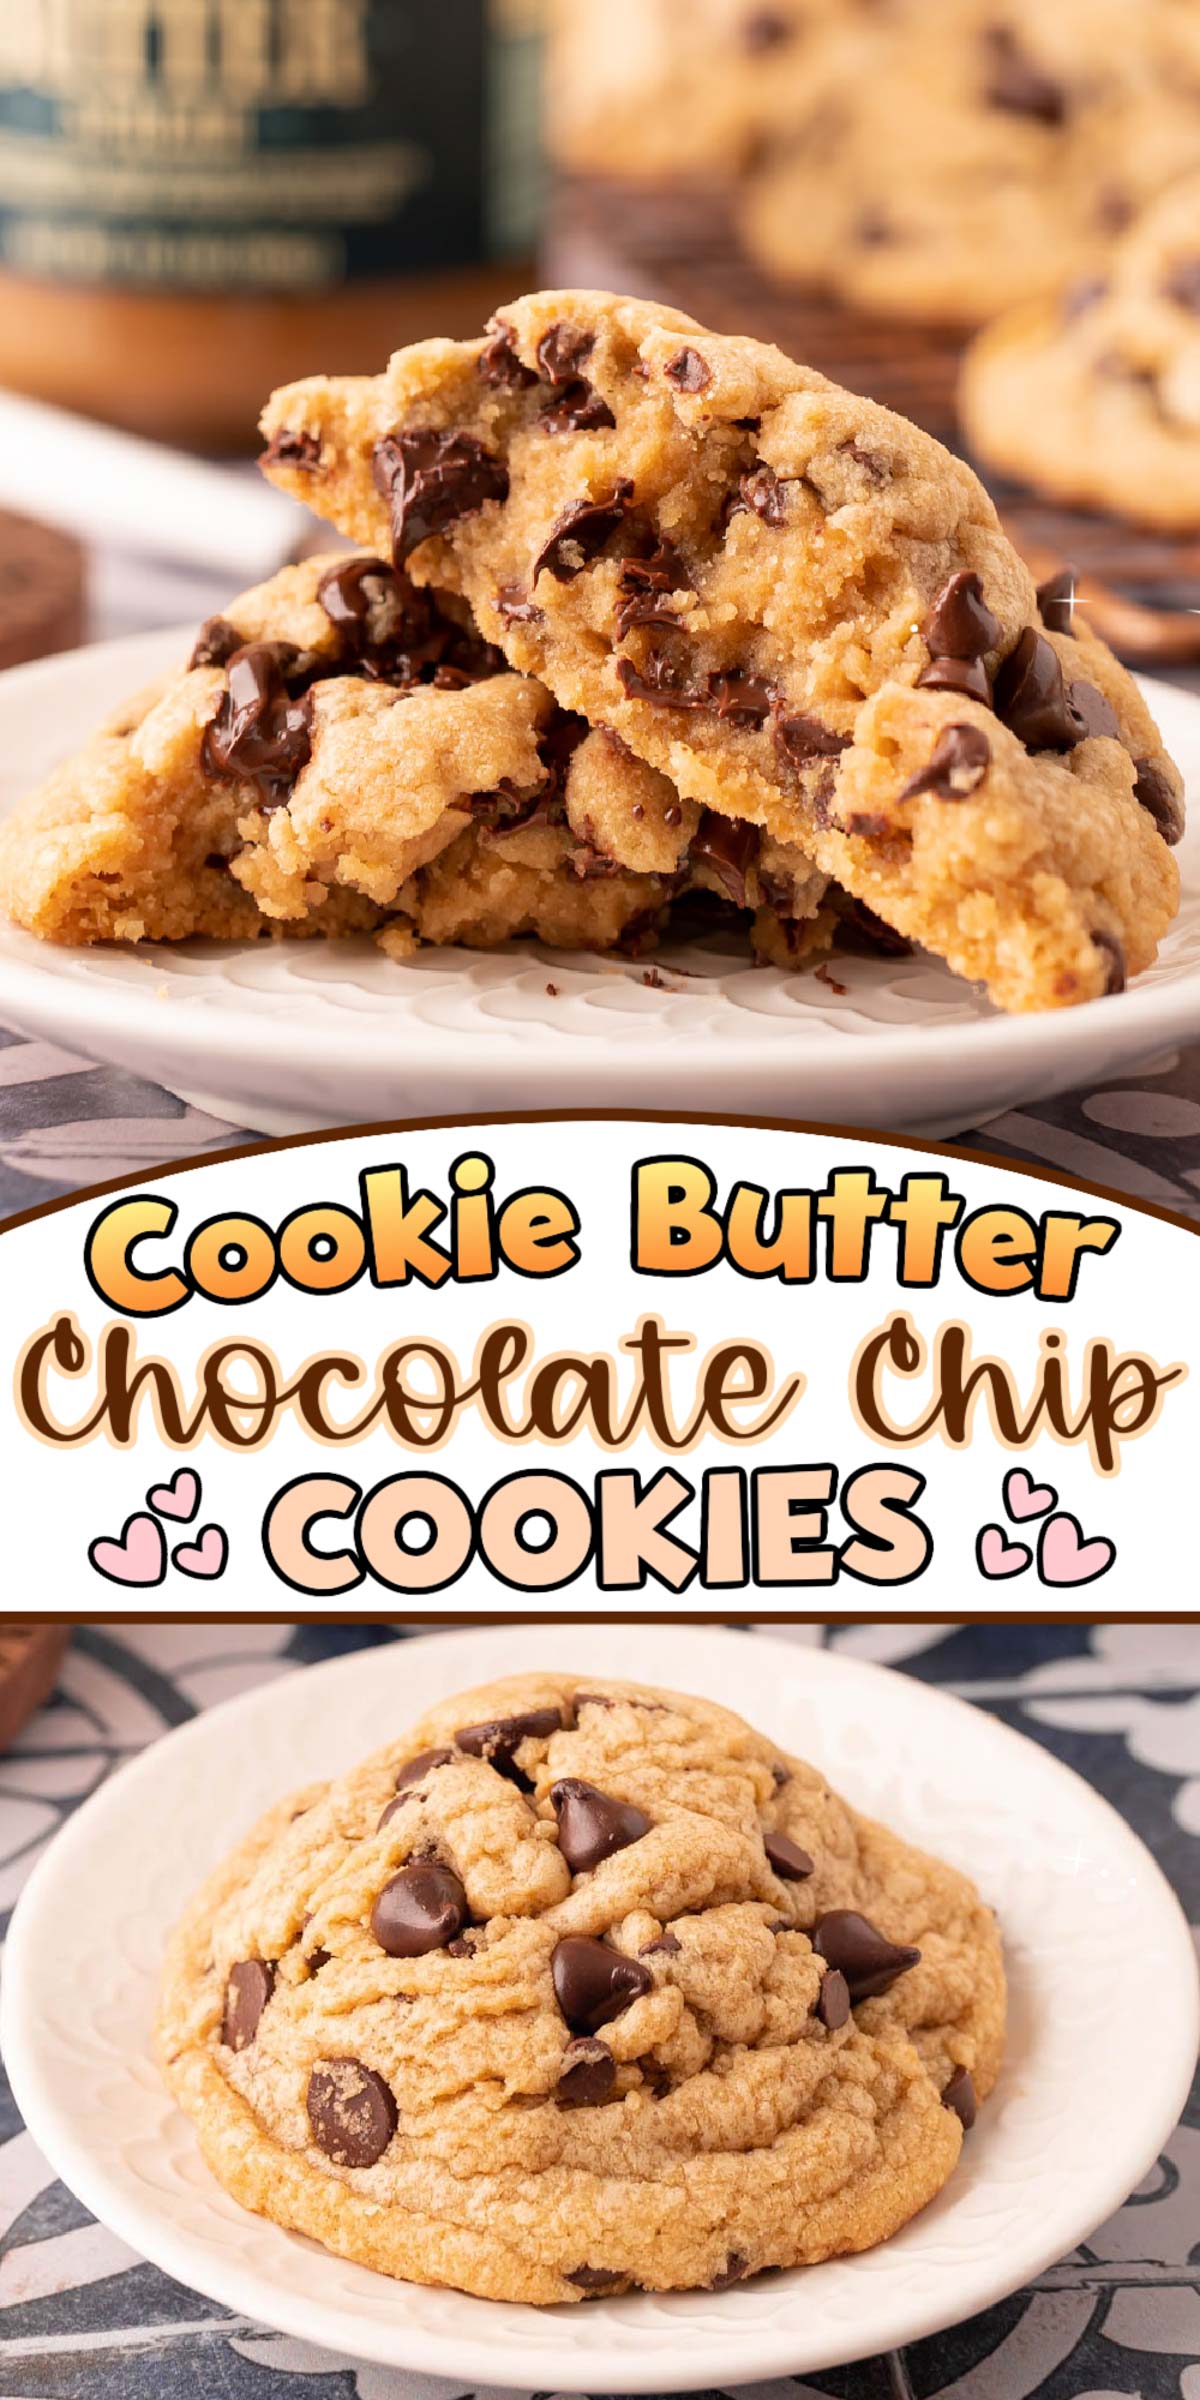 These big and gooey Cookie Butter Chocolate Chip Cookies have a Speculoos Cookie Butter dough that's loaded with chocolate chips for a unique and delicious flavor! via @sugarandsoulco